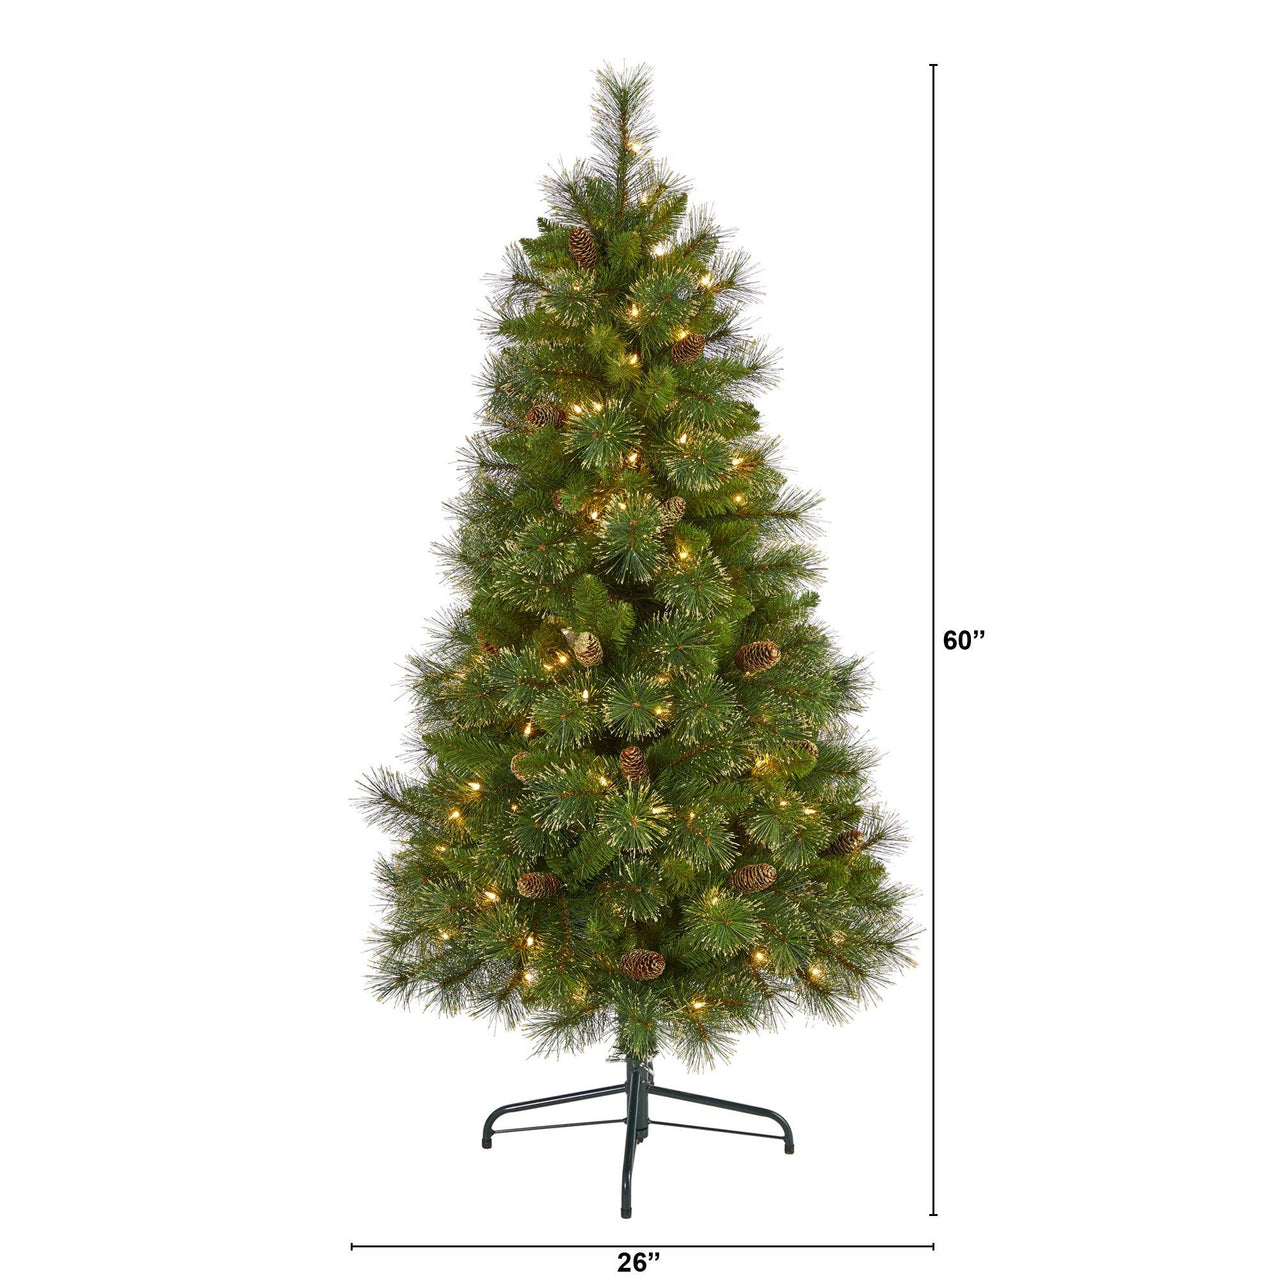 5’ Golden Tip Washington Pine Artificial Christmas Tree with 150 Clear Lights, Pine Cones and 432 Bendable Branches - The Fox Decor